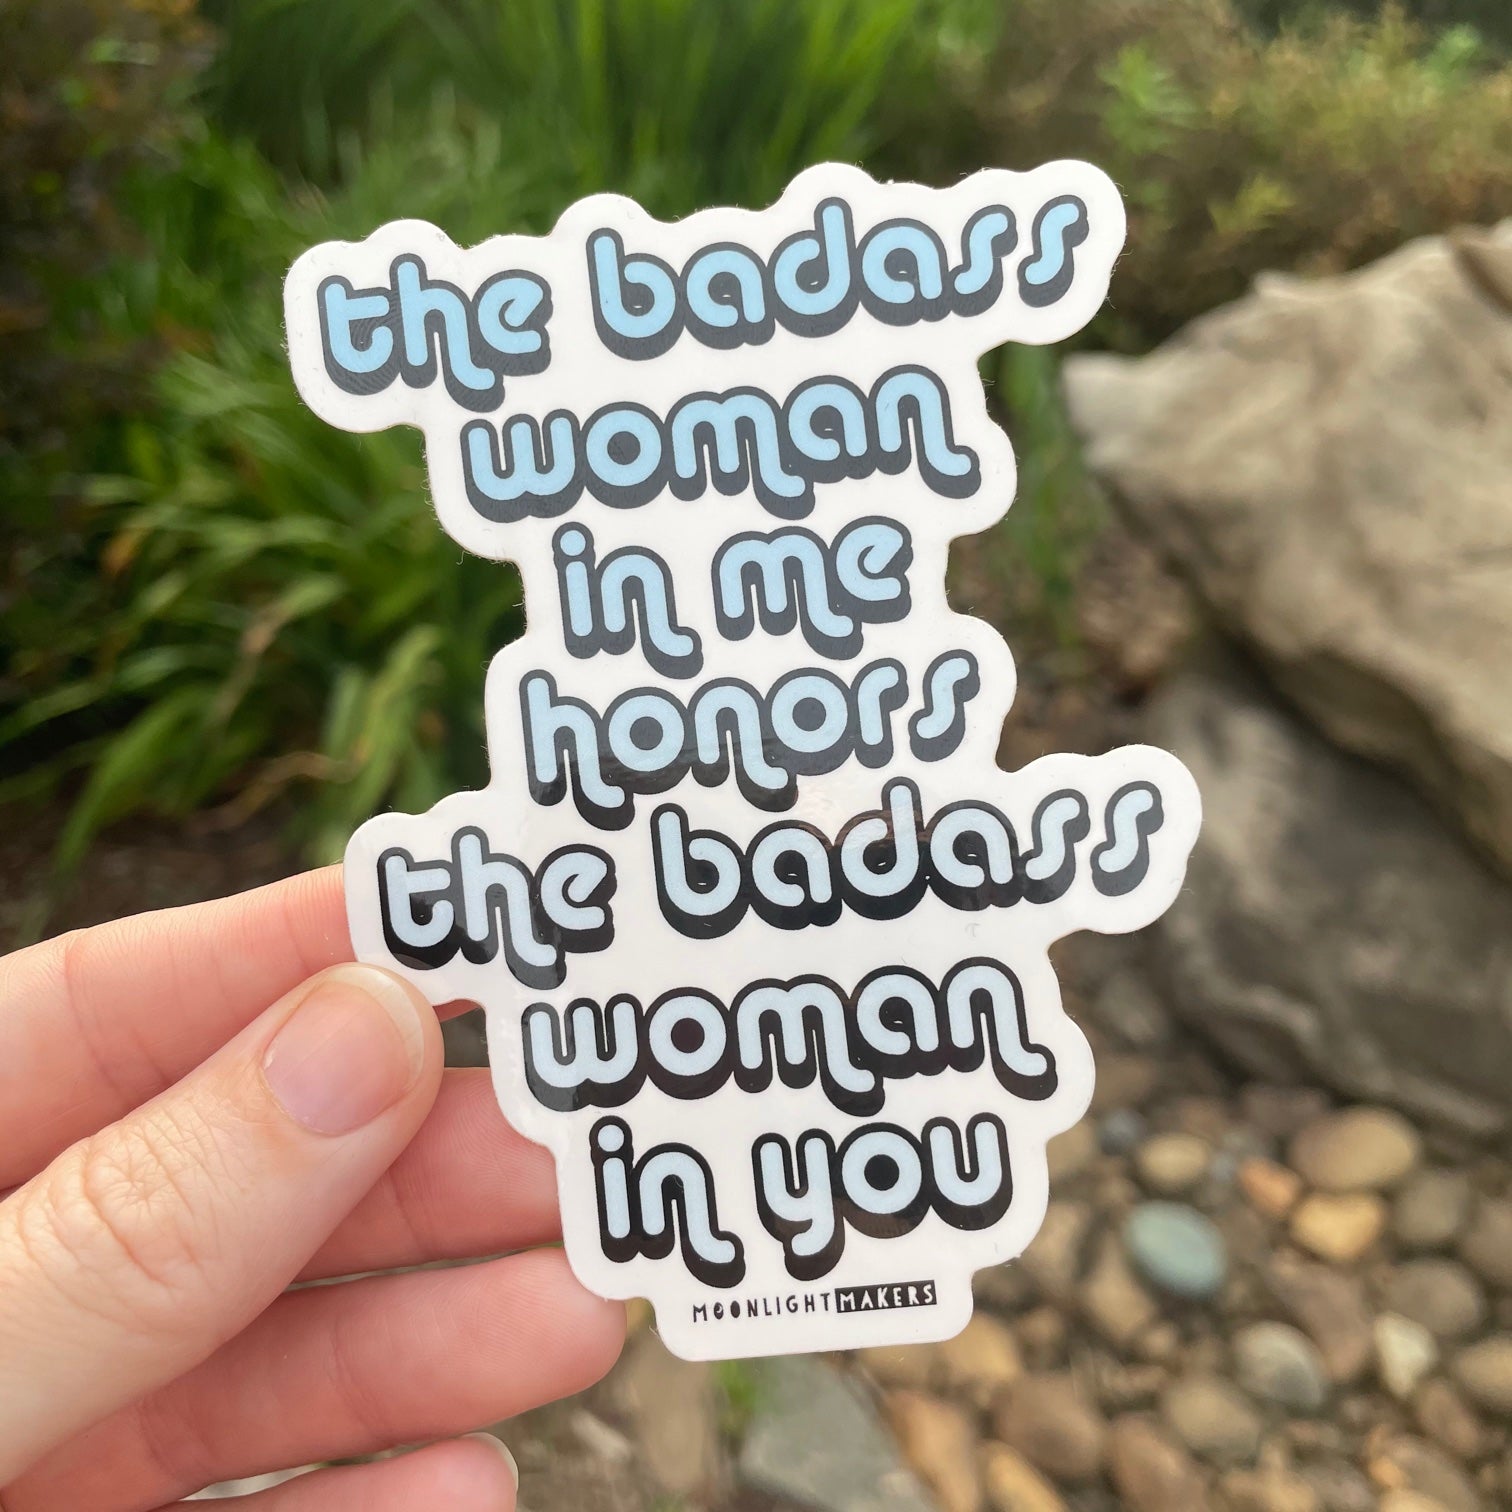 The Badass Woman In Me Honors The Badass Woman In You - Die Cut Sticker - MoonlightMakers